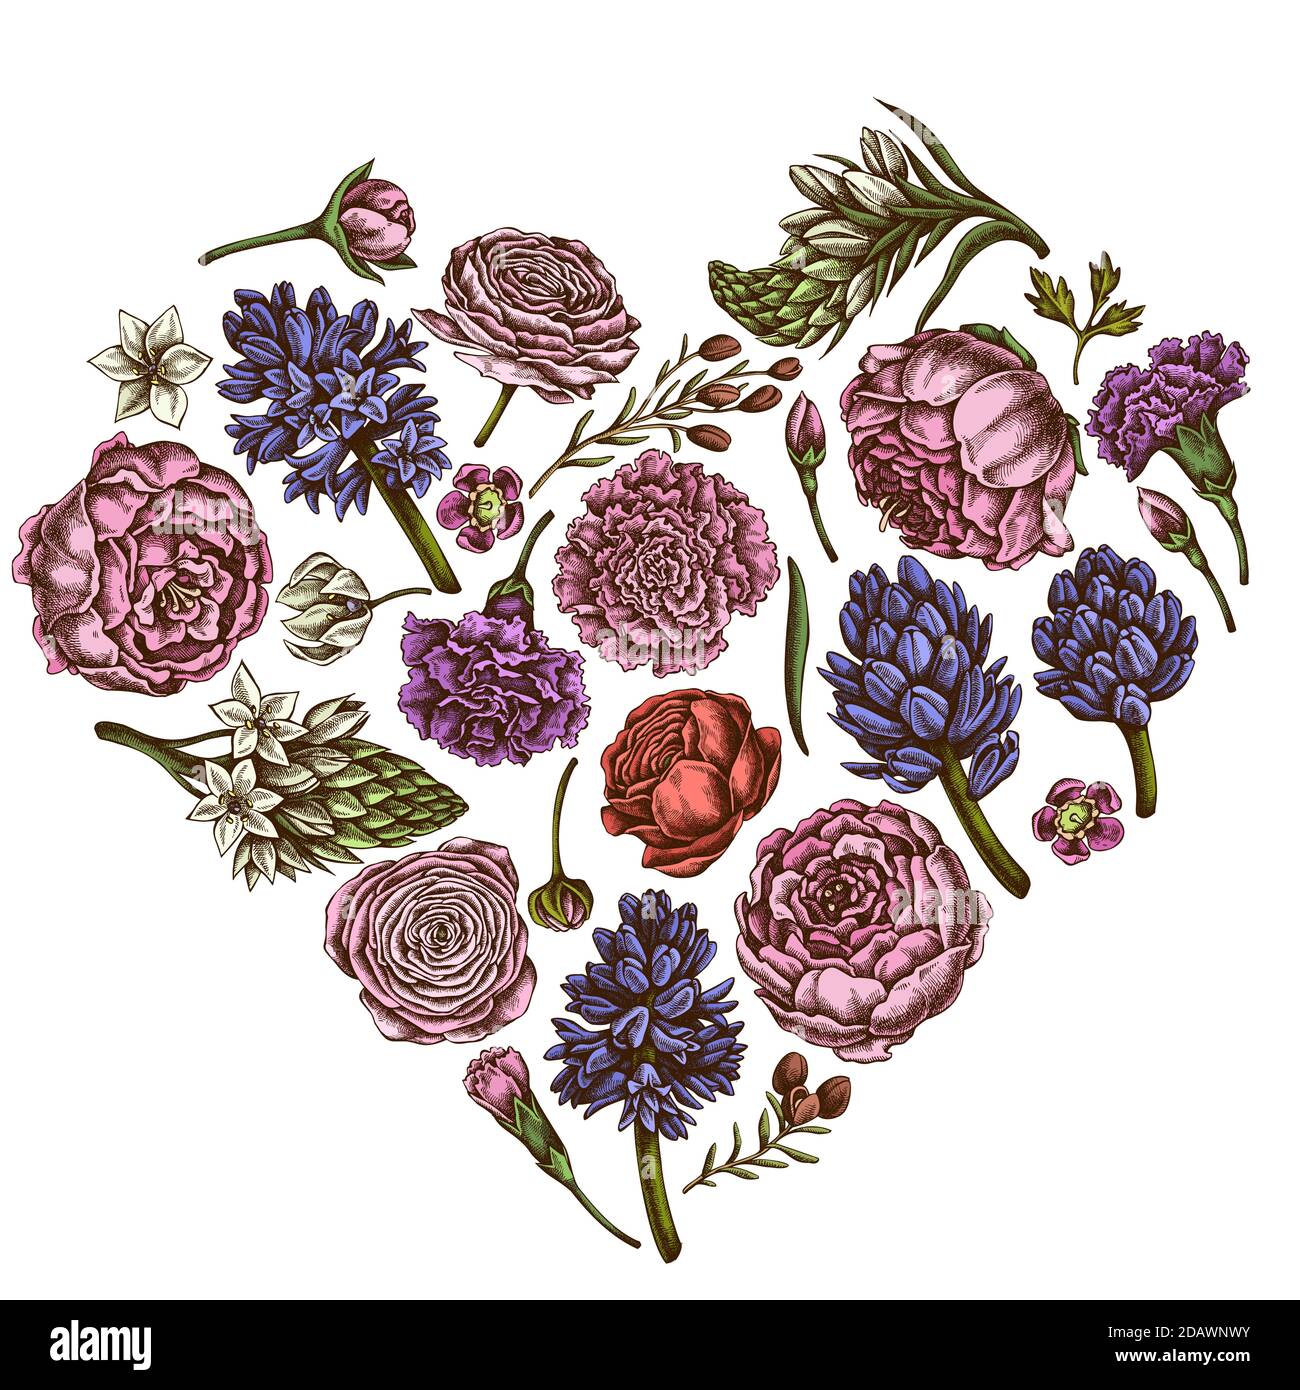 Heart floral design with colored peony, carnation, ranunculus, wax flower, ornithogalum, hyacinth Stock Vector